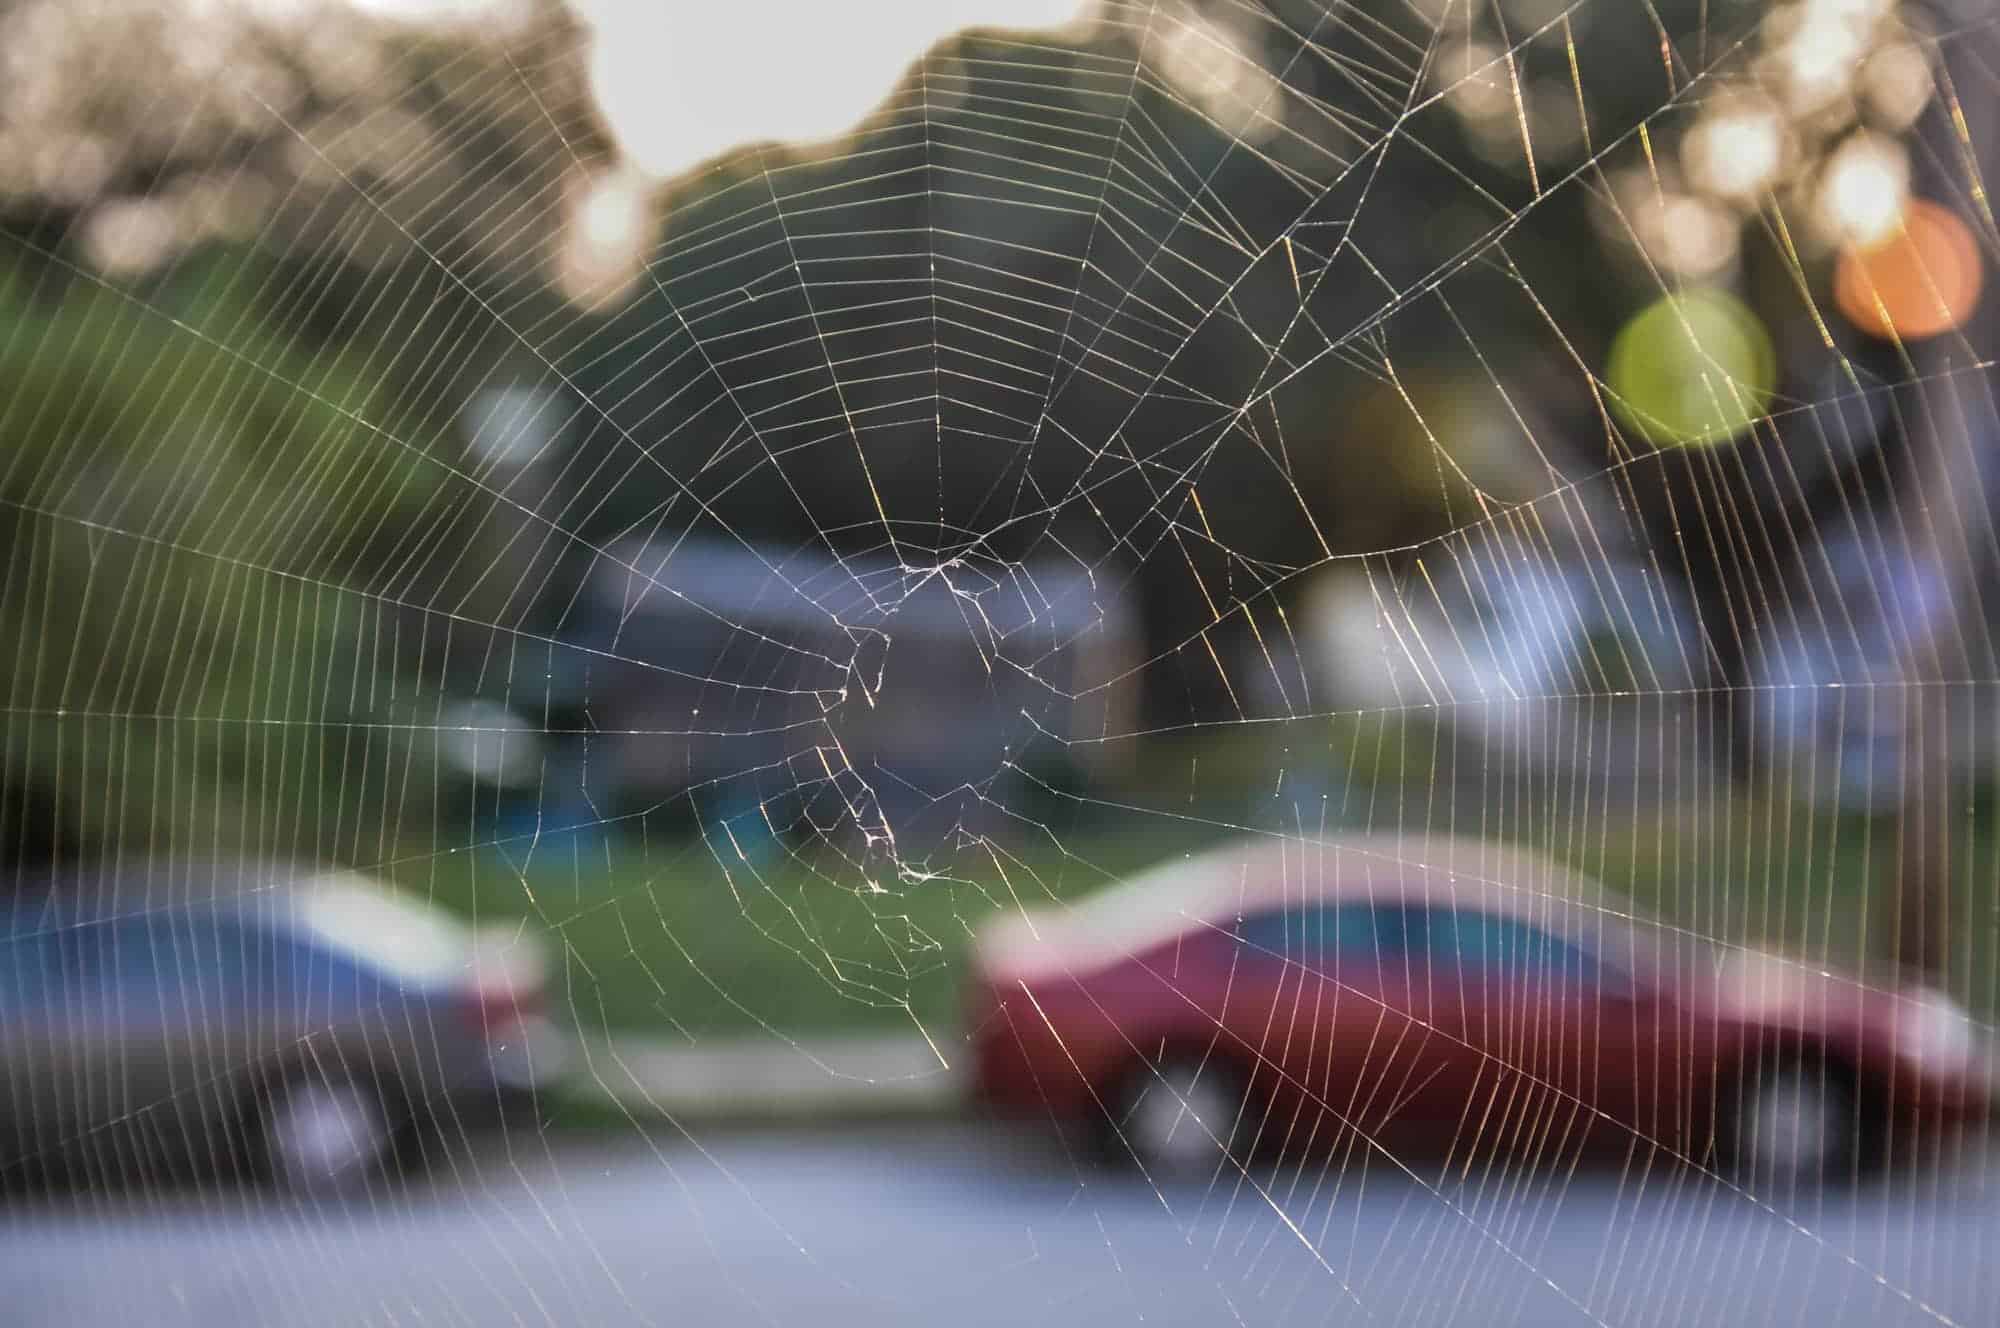 How To Get Rid of Spider Webs? – The Housing Forum